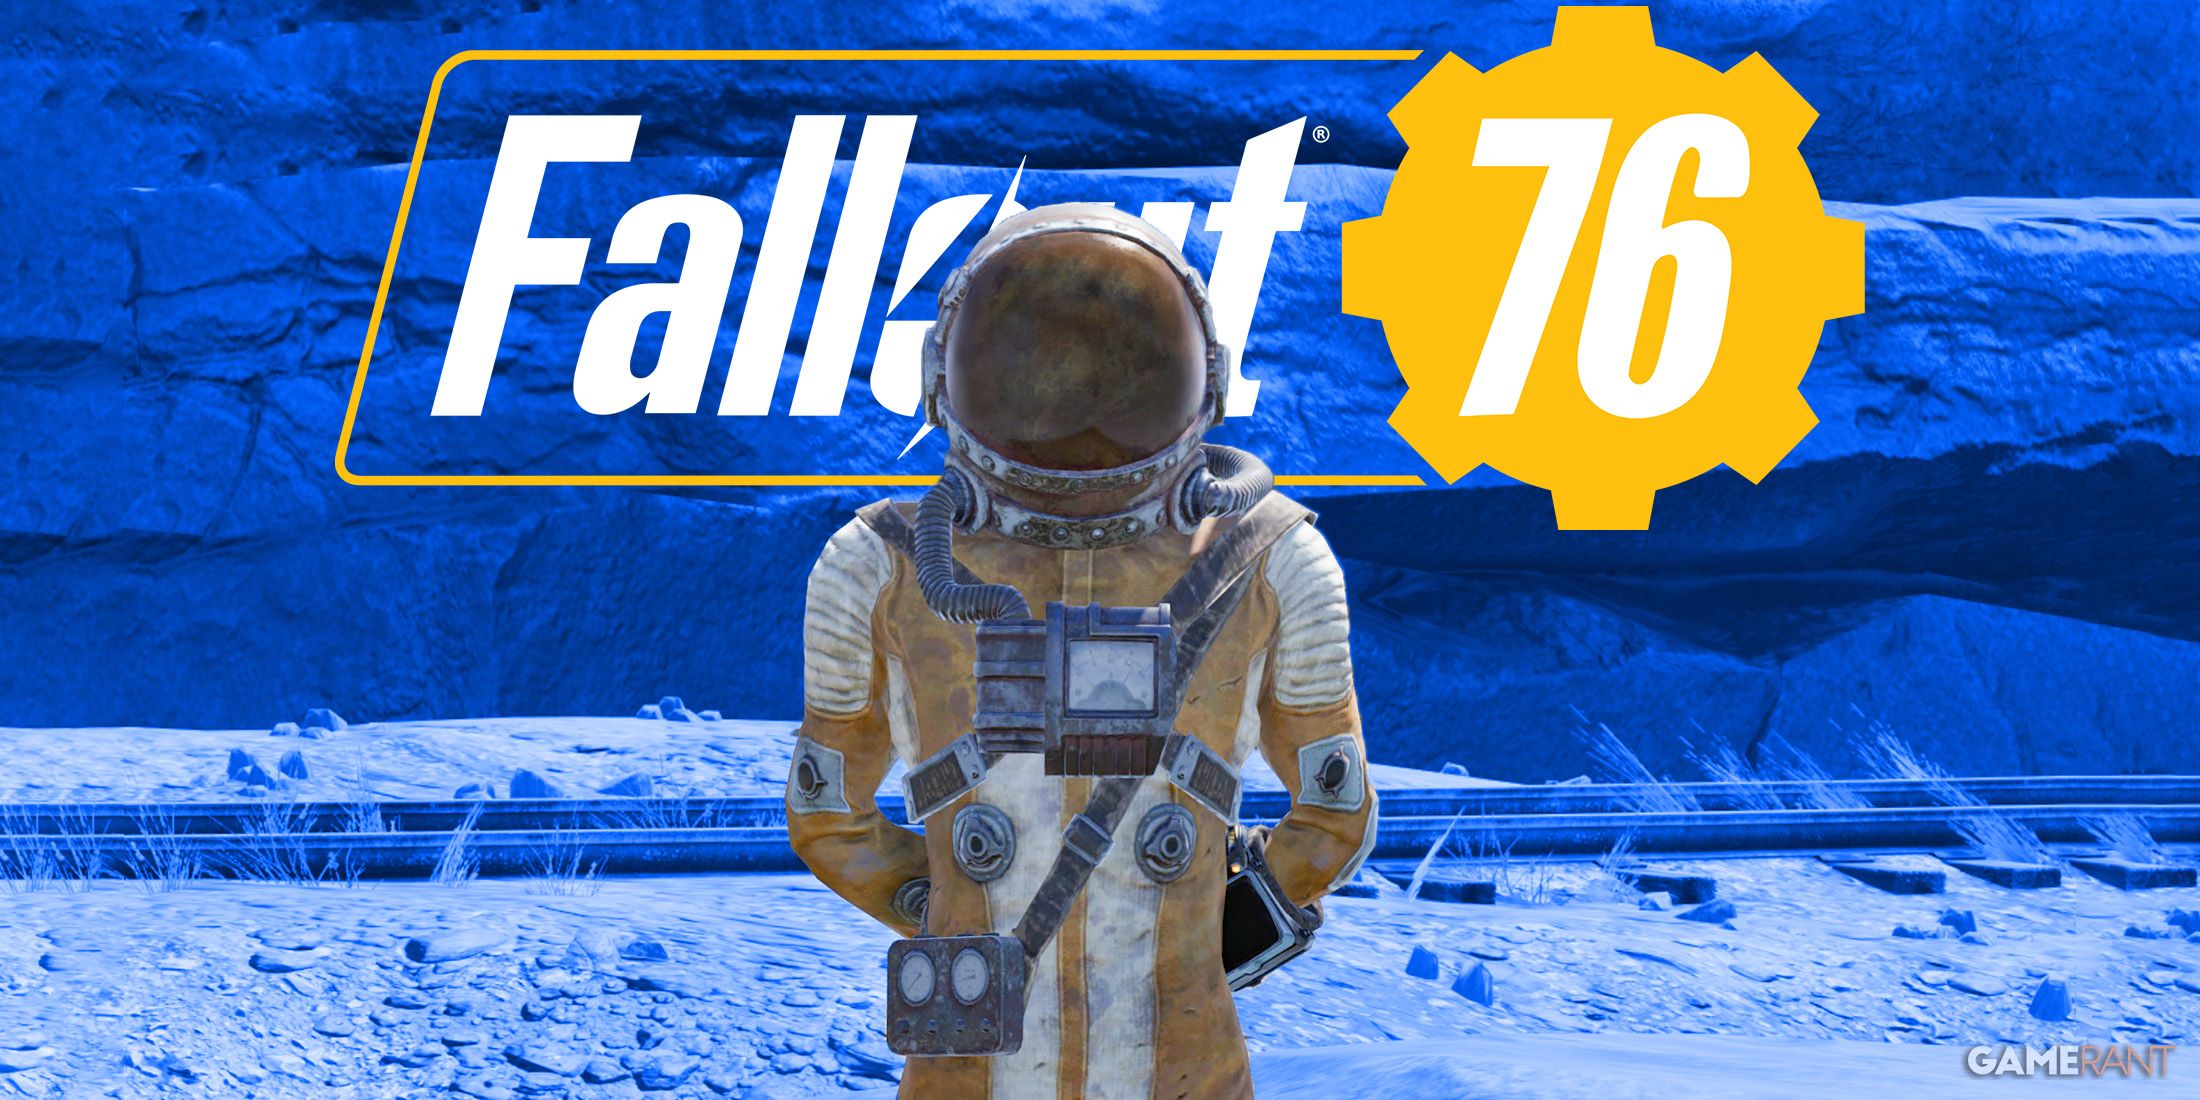 Fallout 76 character in Hazmat Suit standing in front of game logo blue background swap